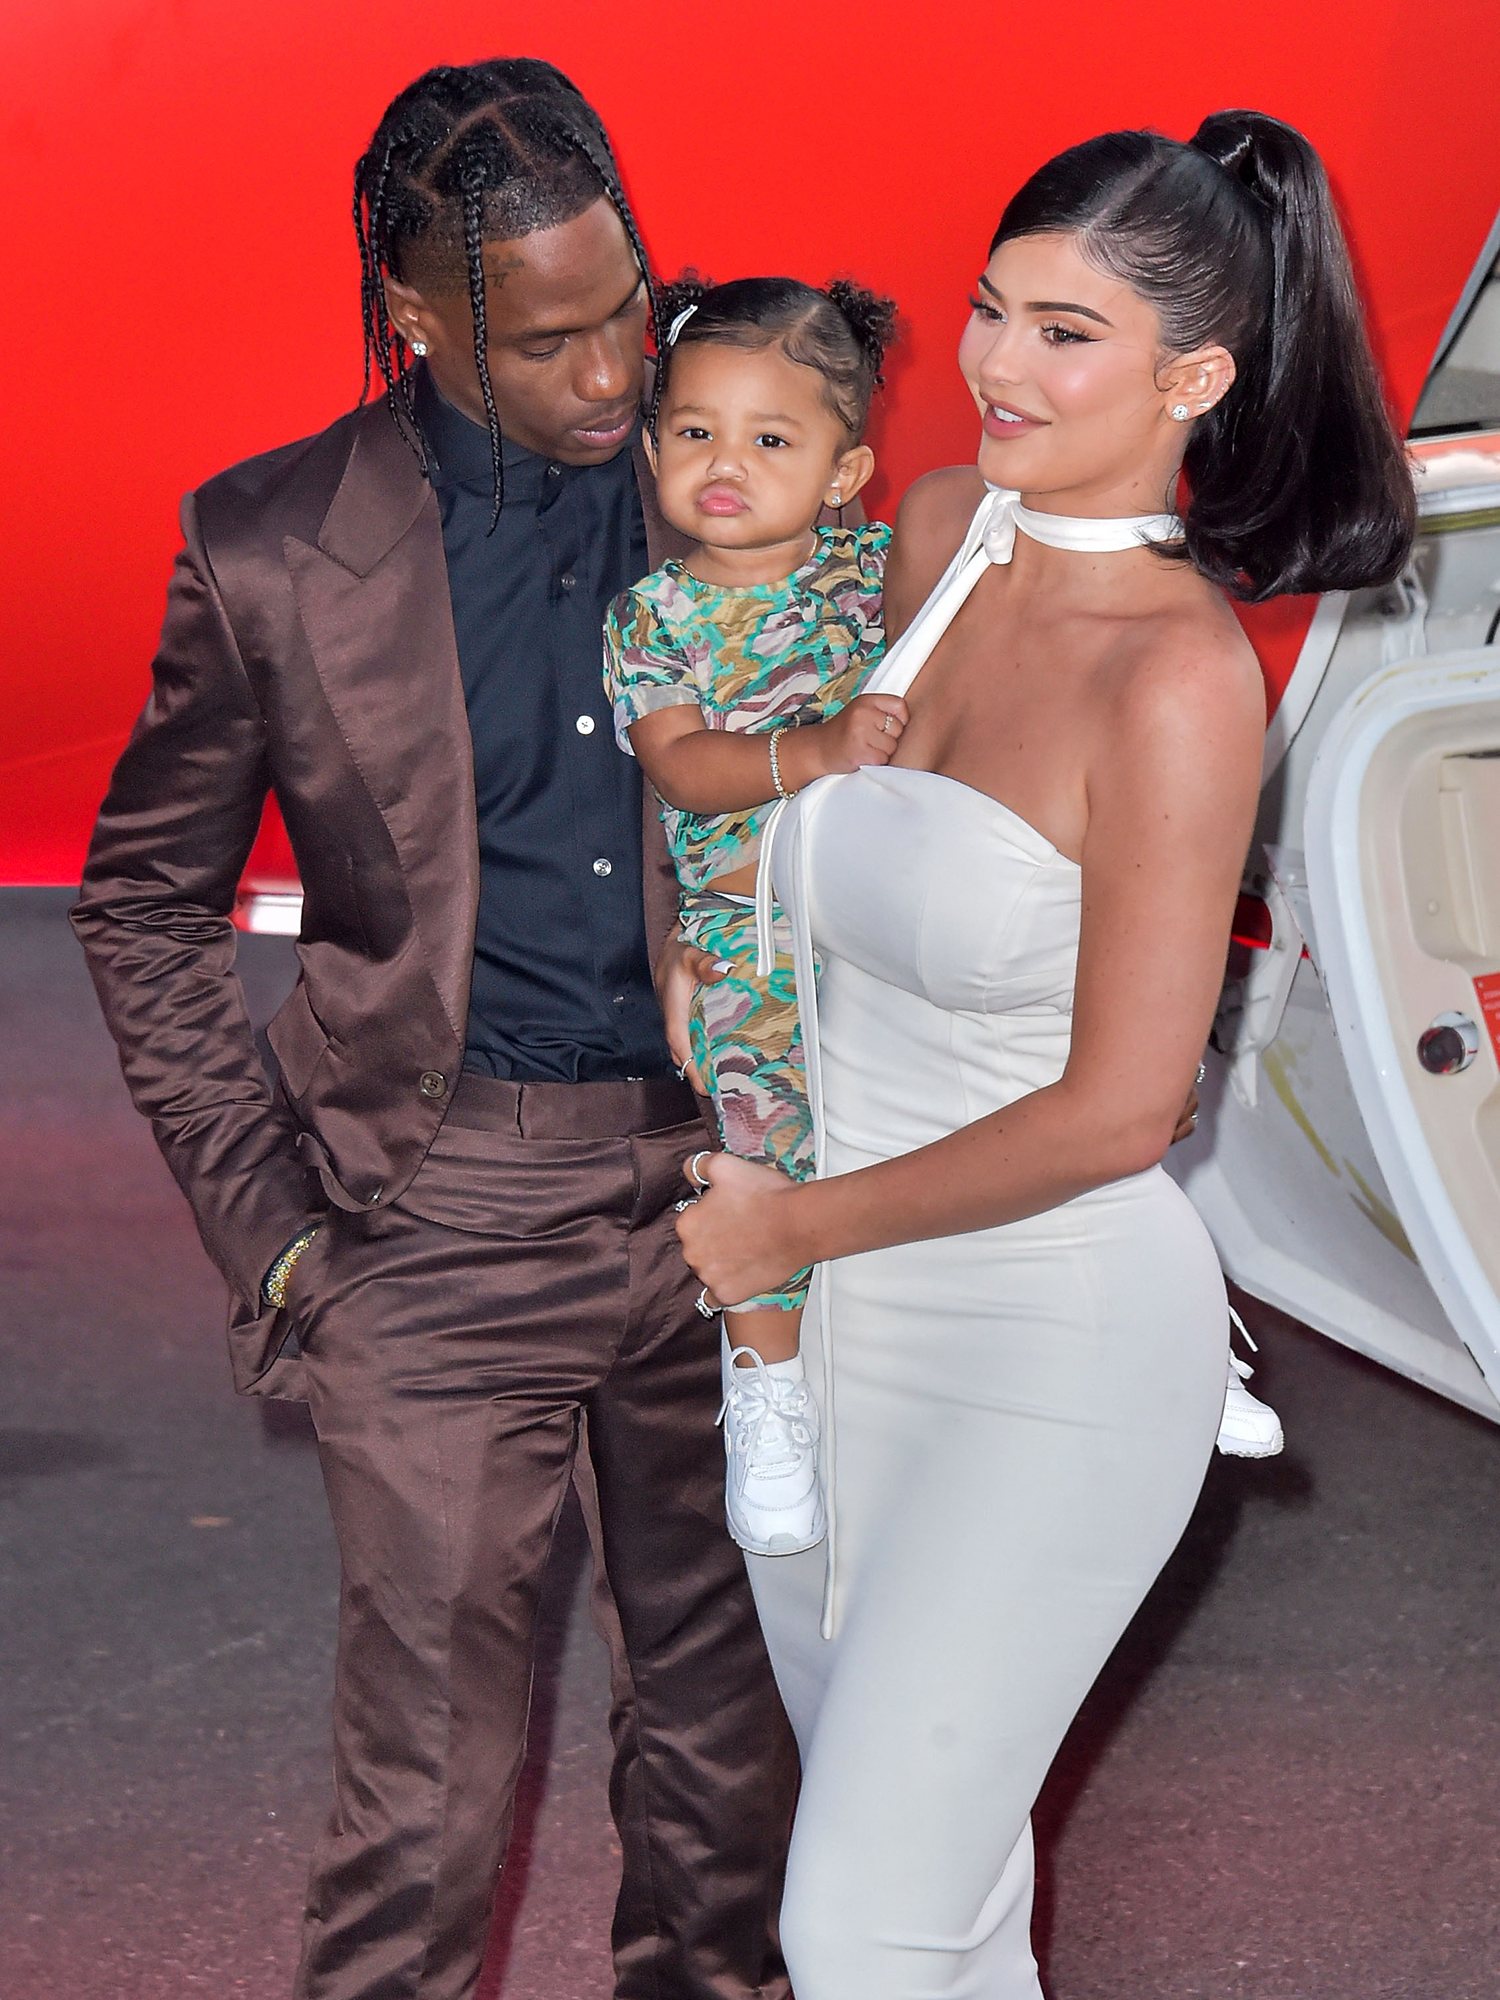 Why did Kylie Jenner and Travis Scott break up?